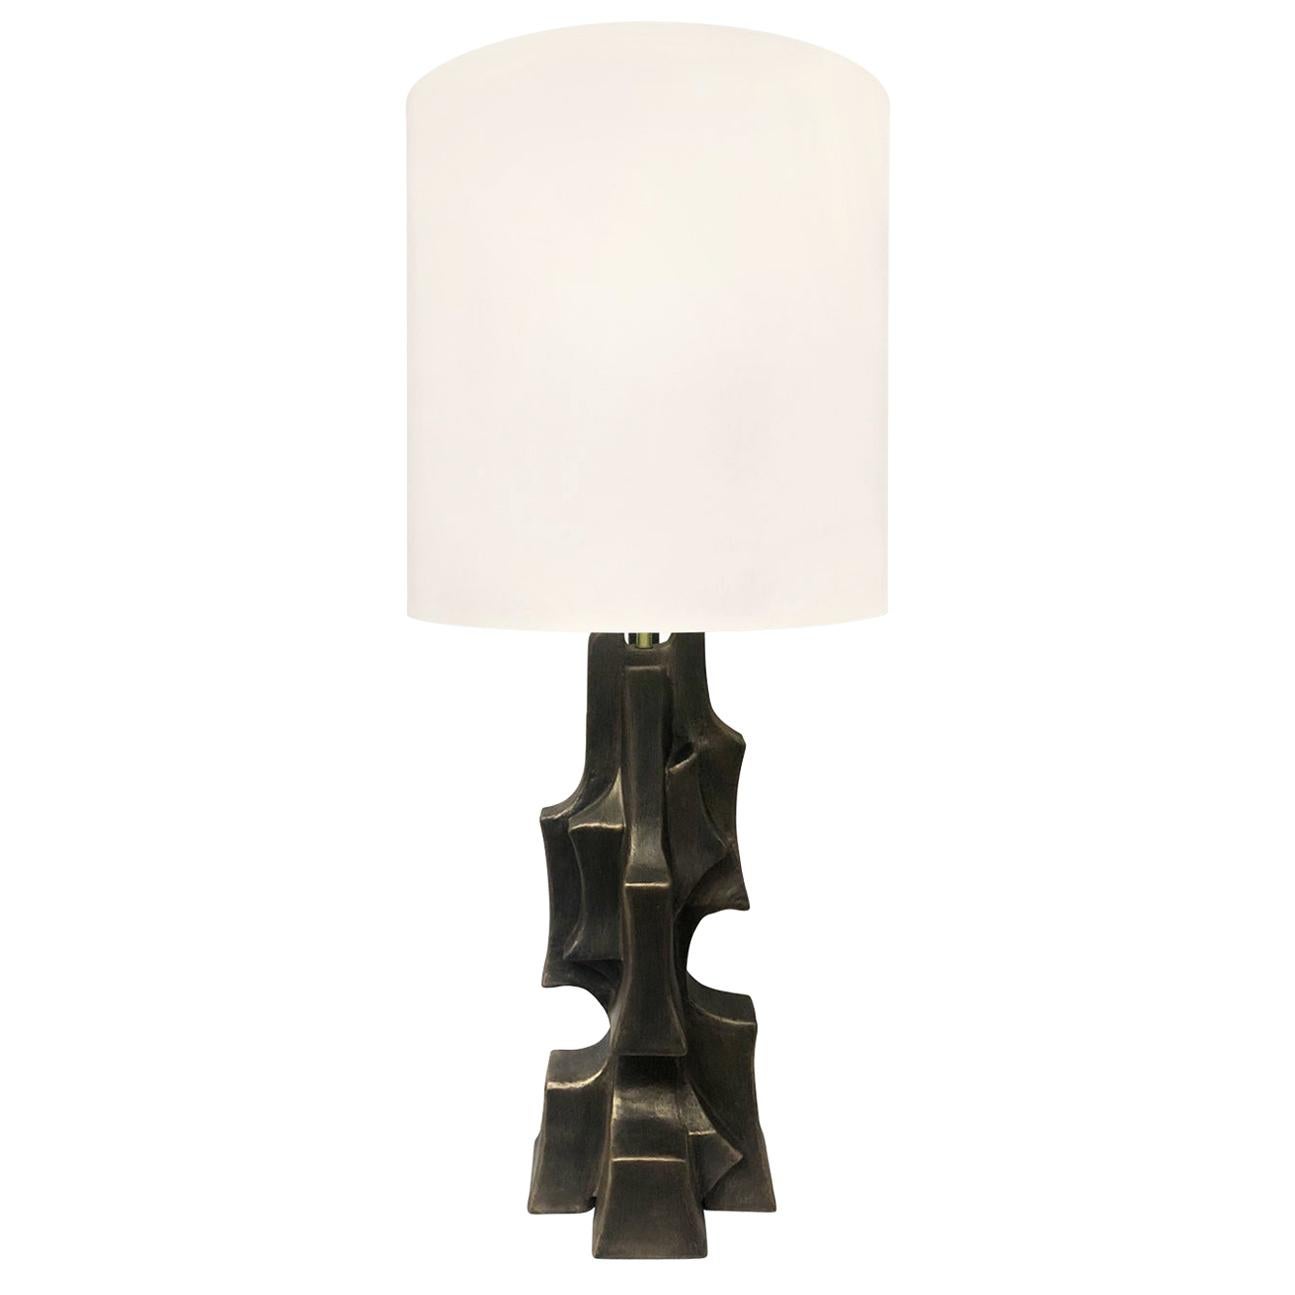 Organic Form Table Lamp in Black Gold Finish by Dan Schneiger